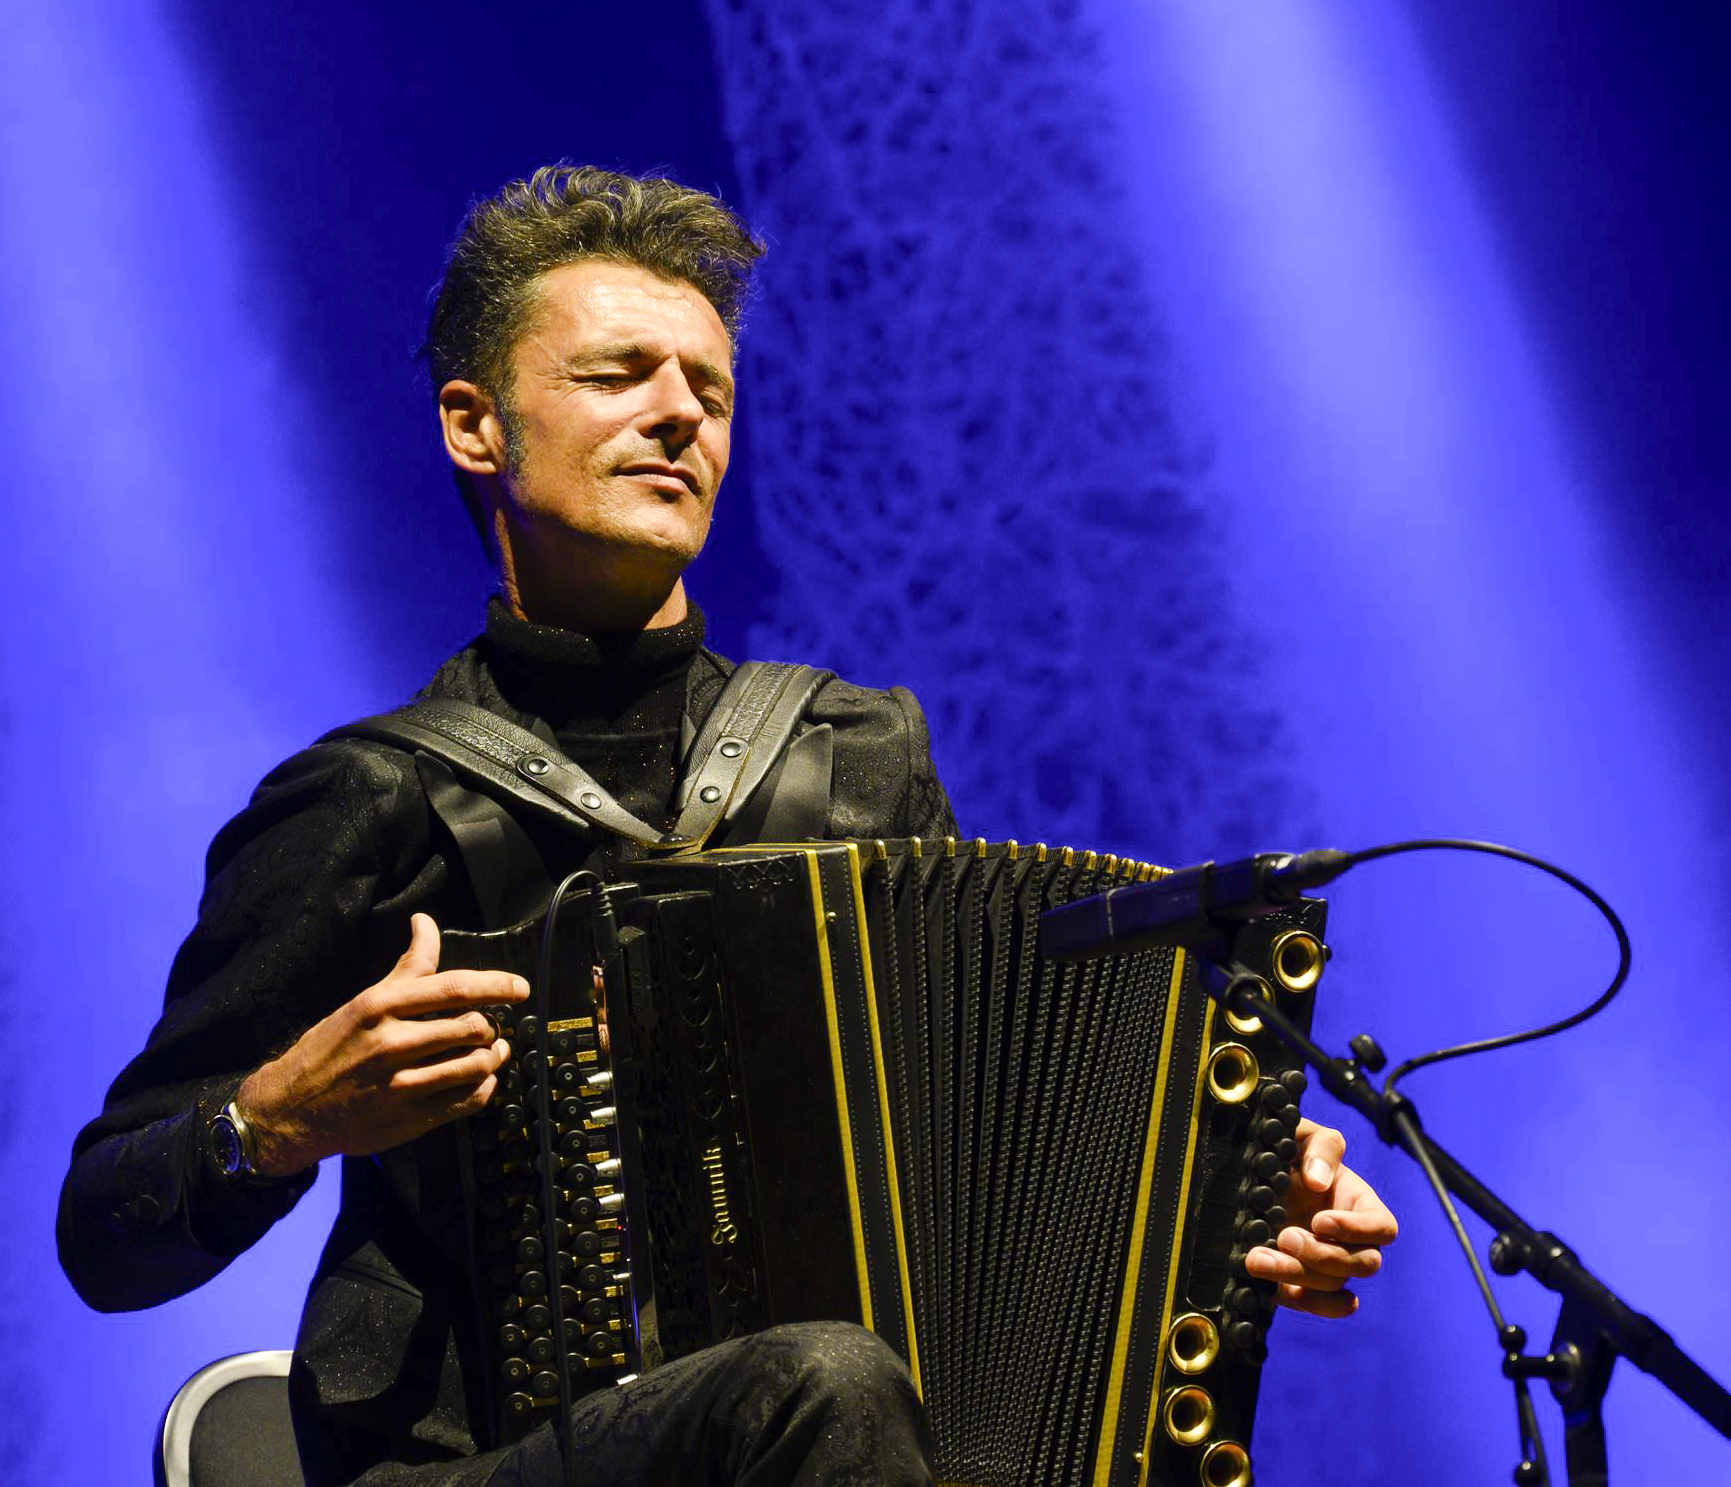 The musician Herbert Pixner with accordion on a stage. The background is blue.